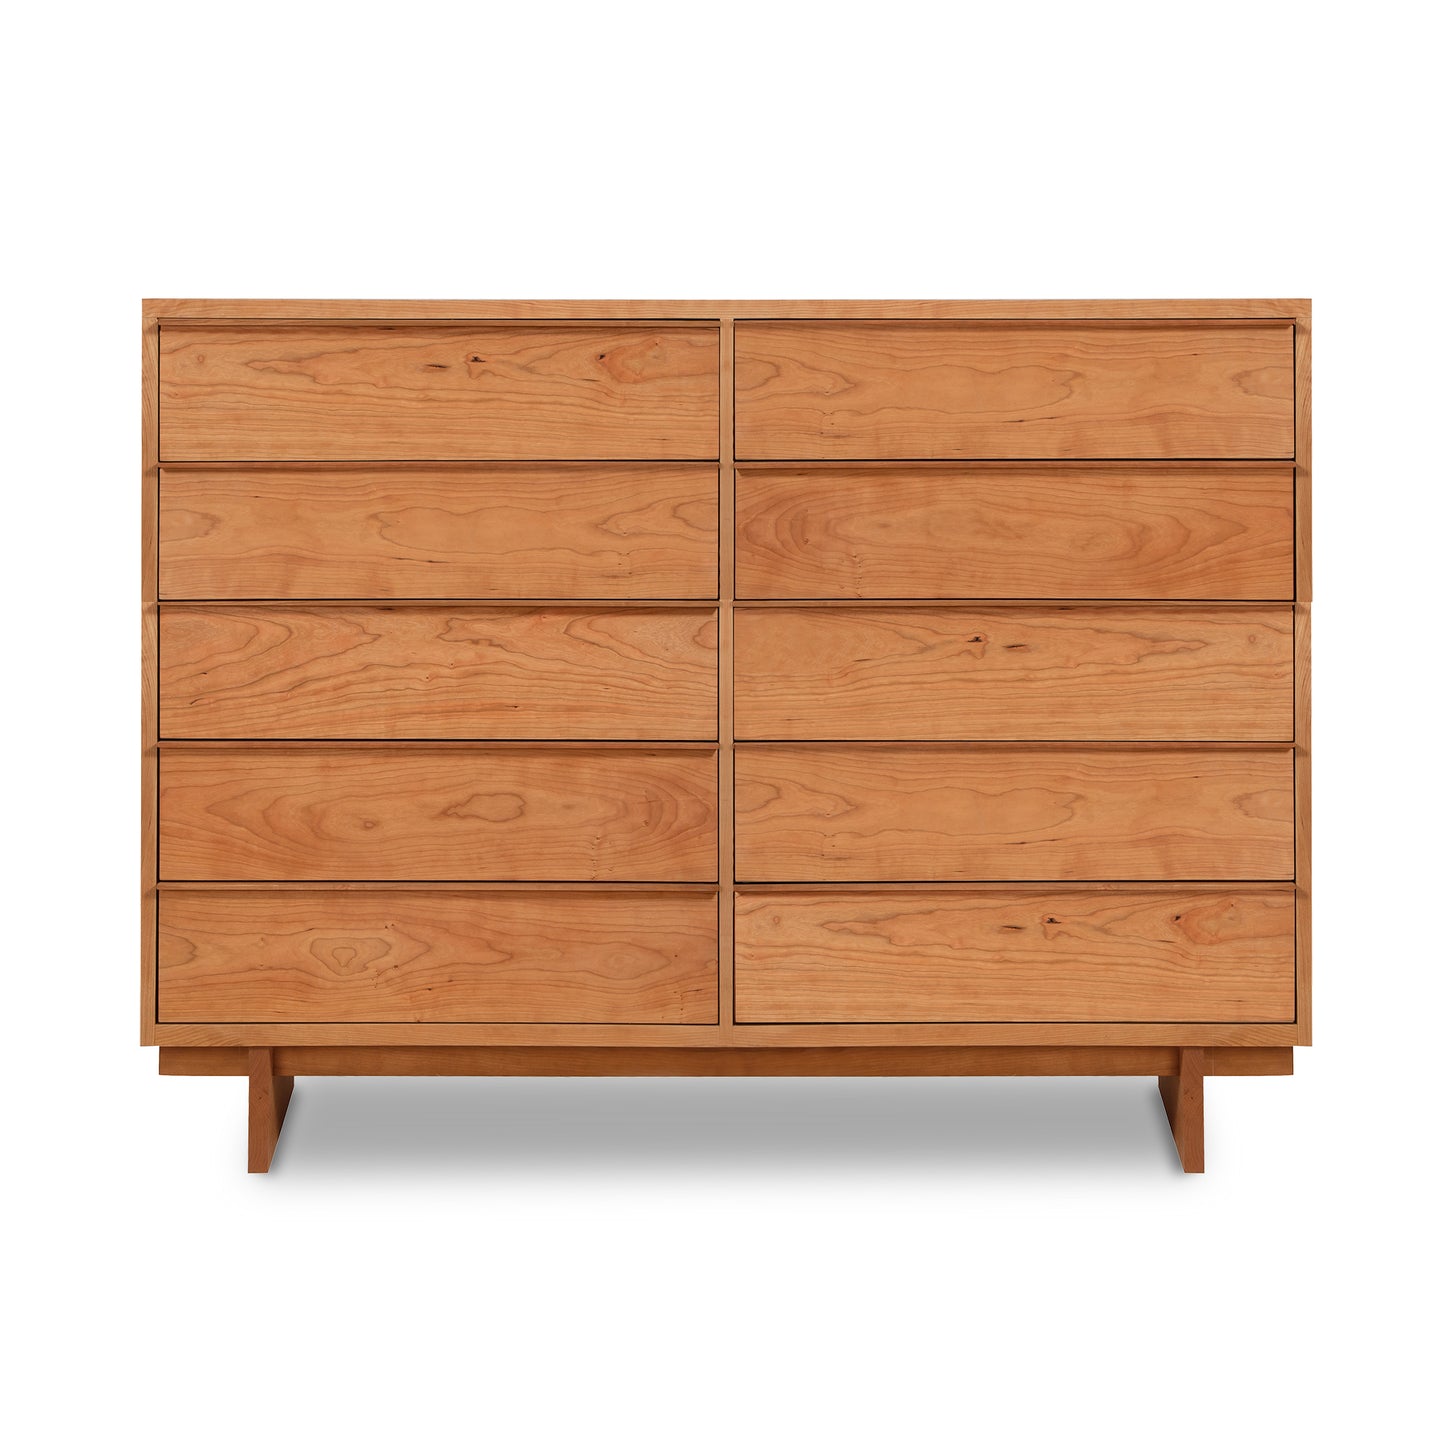 A mid-century modern style Kipling 10-Drawer Dresser made by Vermont Furniture Designs, with six drawers, isolated on a white background.